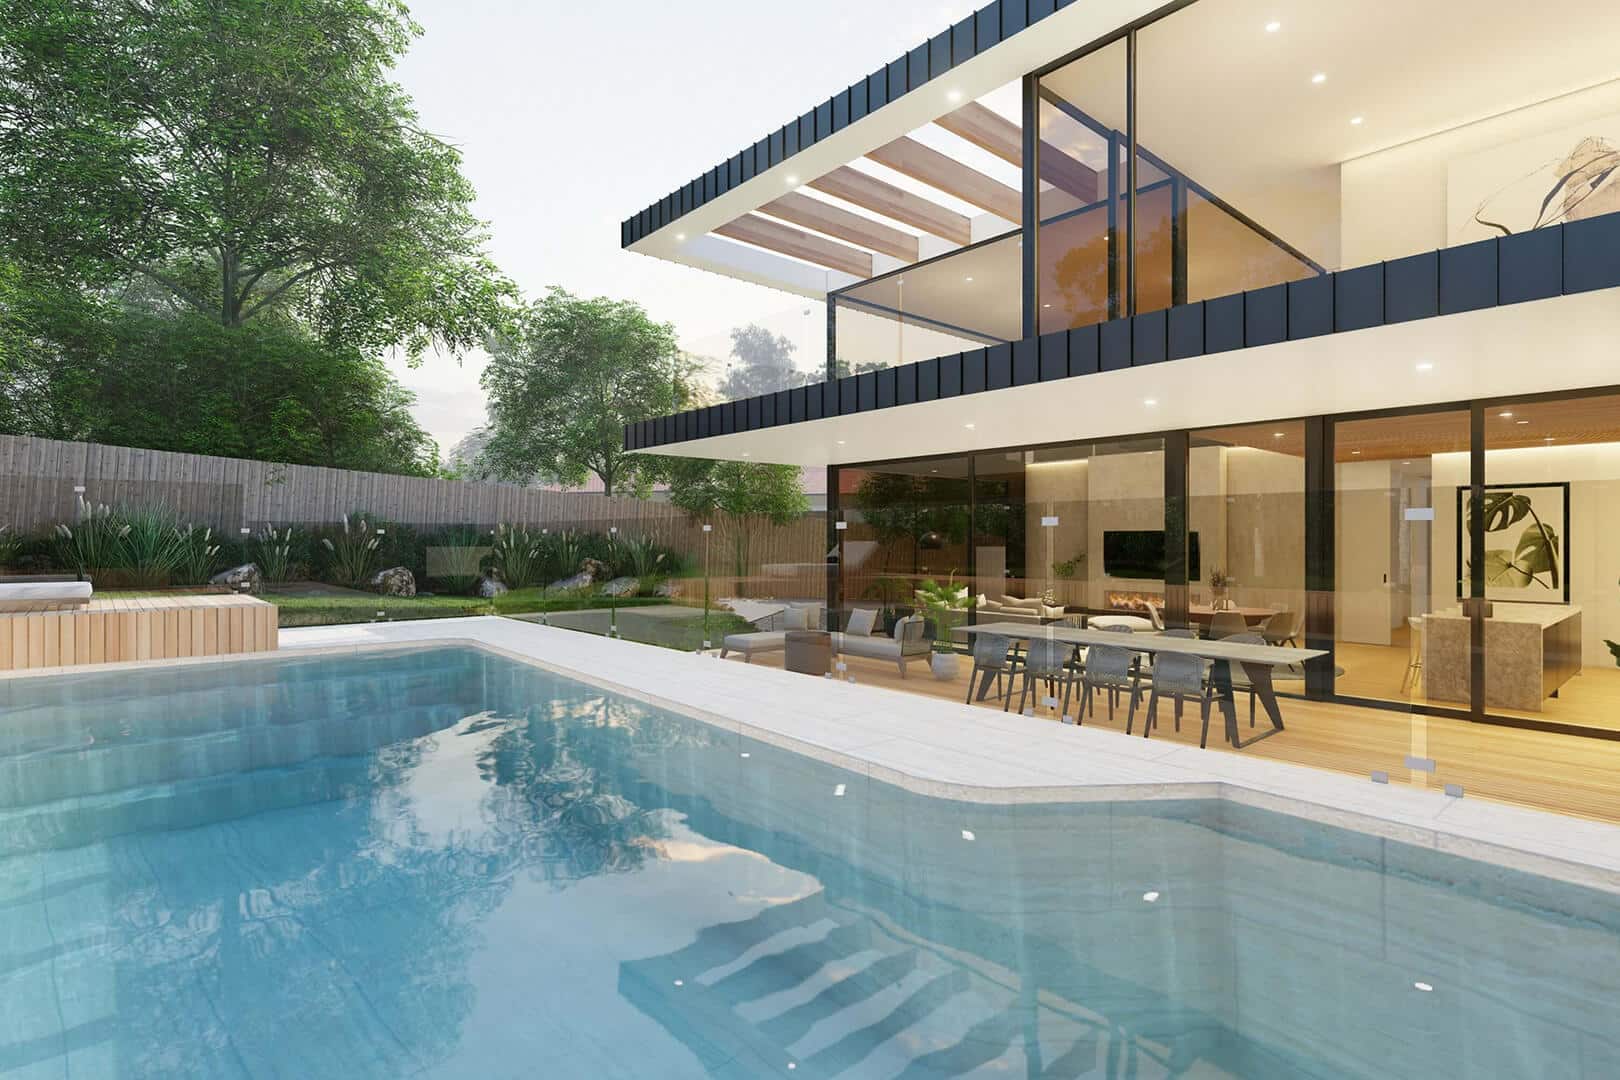 Camberwell Modern House – designed by Sky Architect Studio. Alteration and Additions to an existing Heritage house, a transition from old to new. Smooth connection to the new swimming pool at the rear.